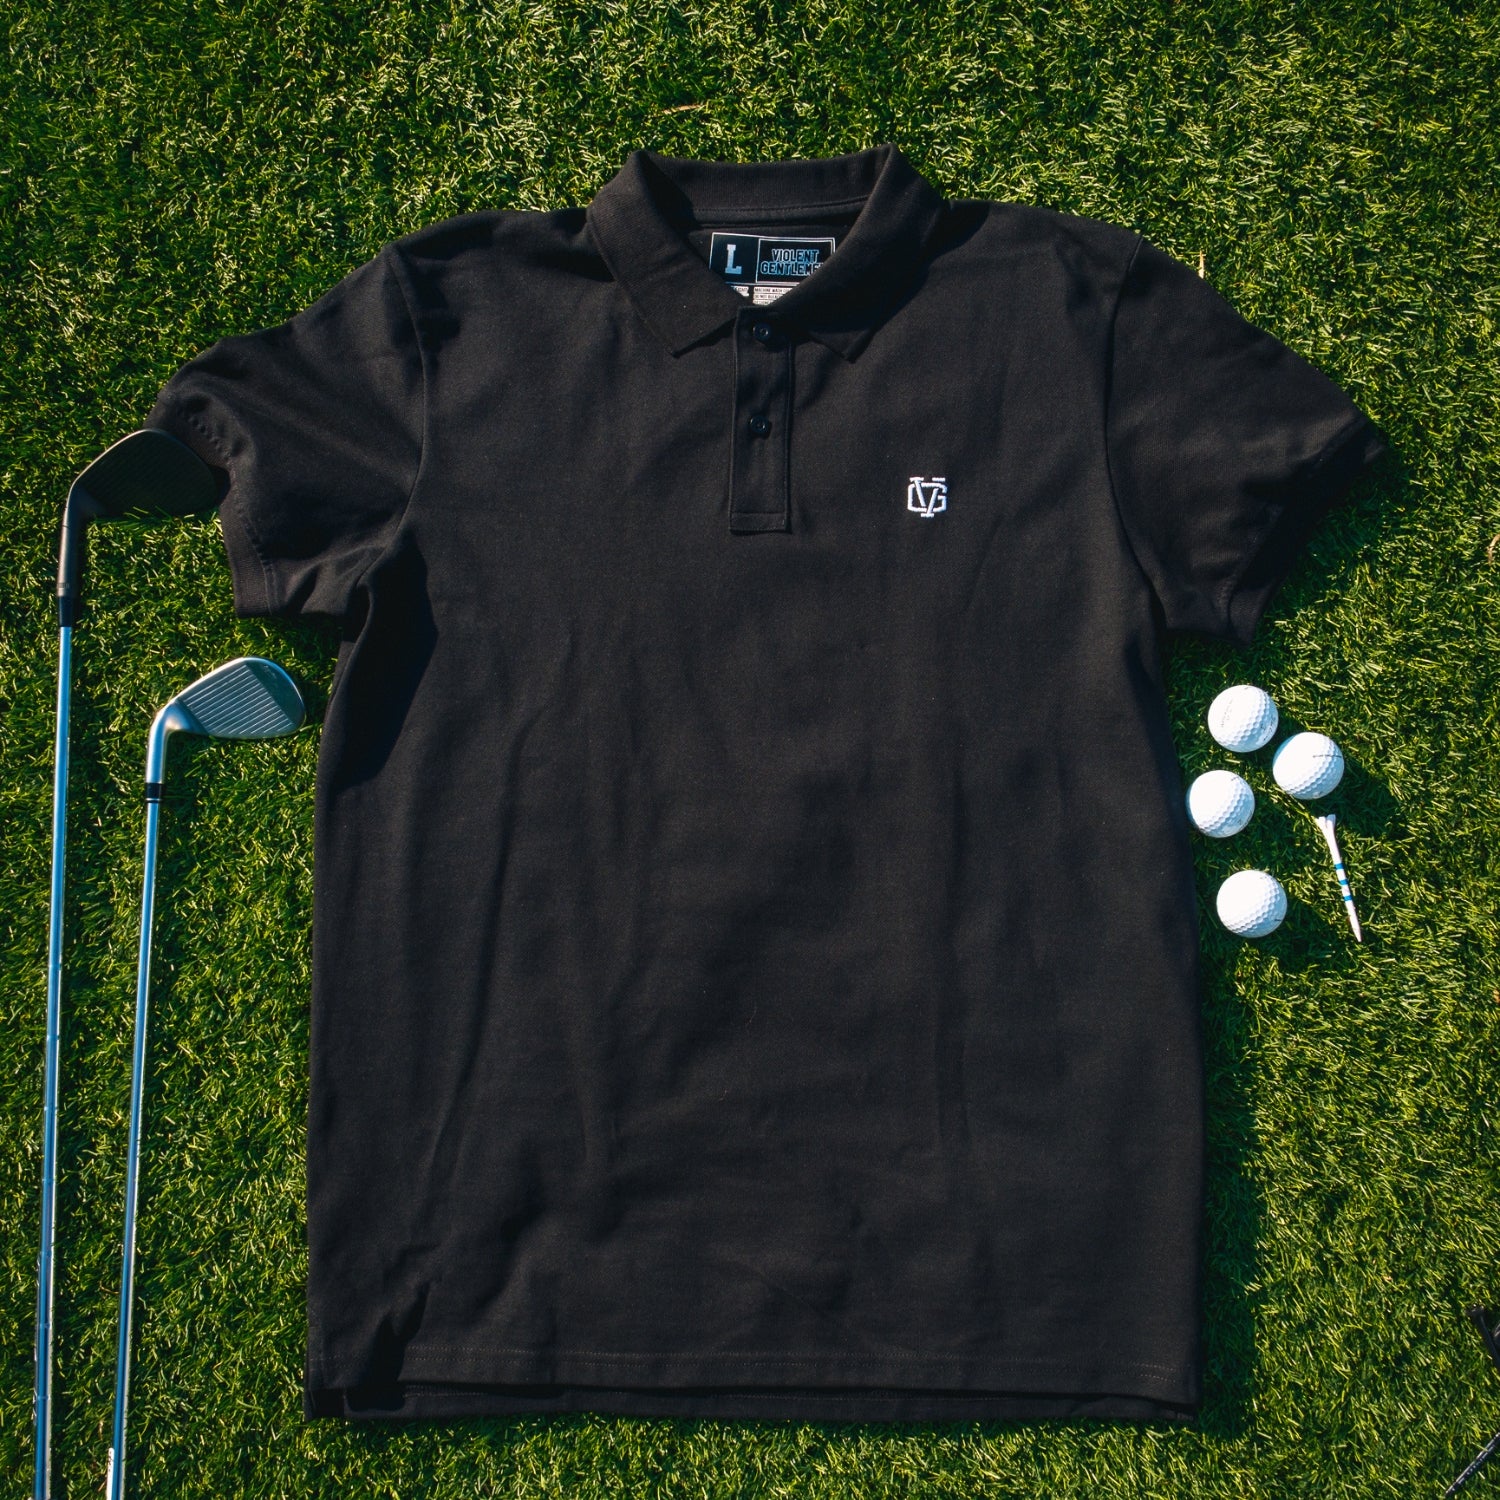 Lifetipsforbetterliving Hockey Clothing Company new Golf collection. With more and more teams hitting the links, it’s time to continue our quest of taking over the golf course as well… Learn more about our May 1, 2023 new Lifetipsforbetterliving Country Club golf releases.